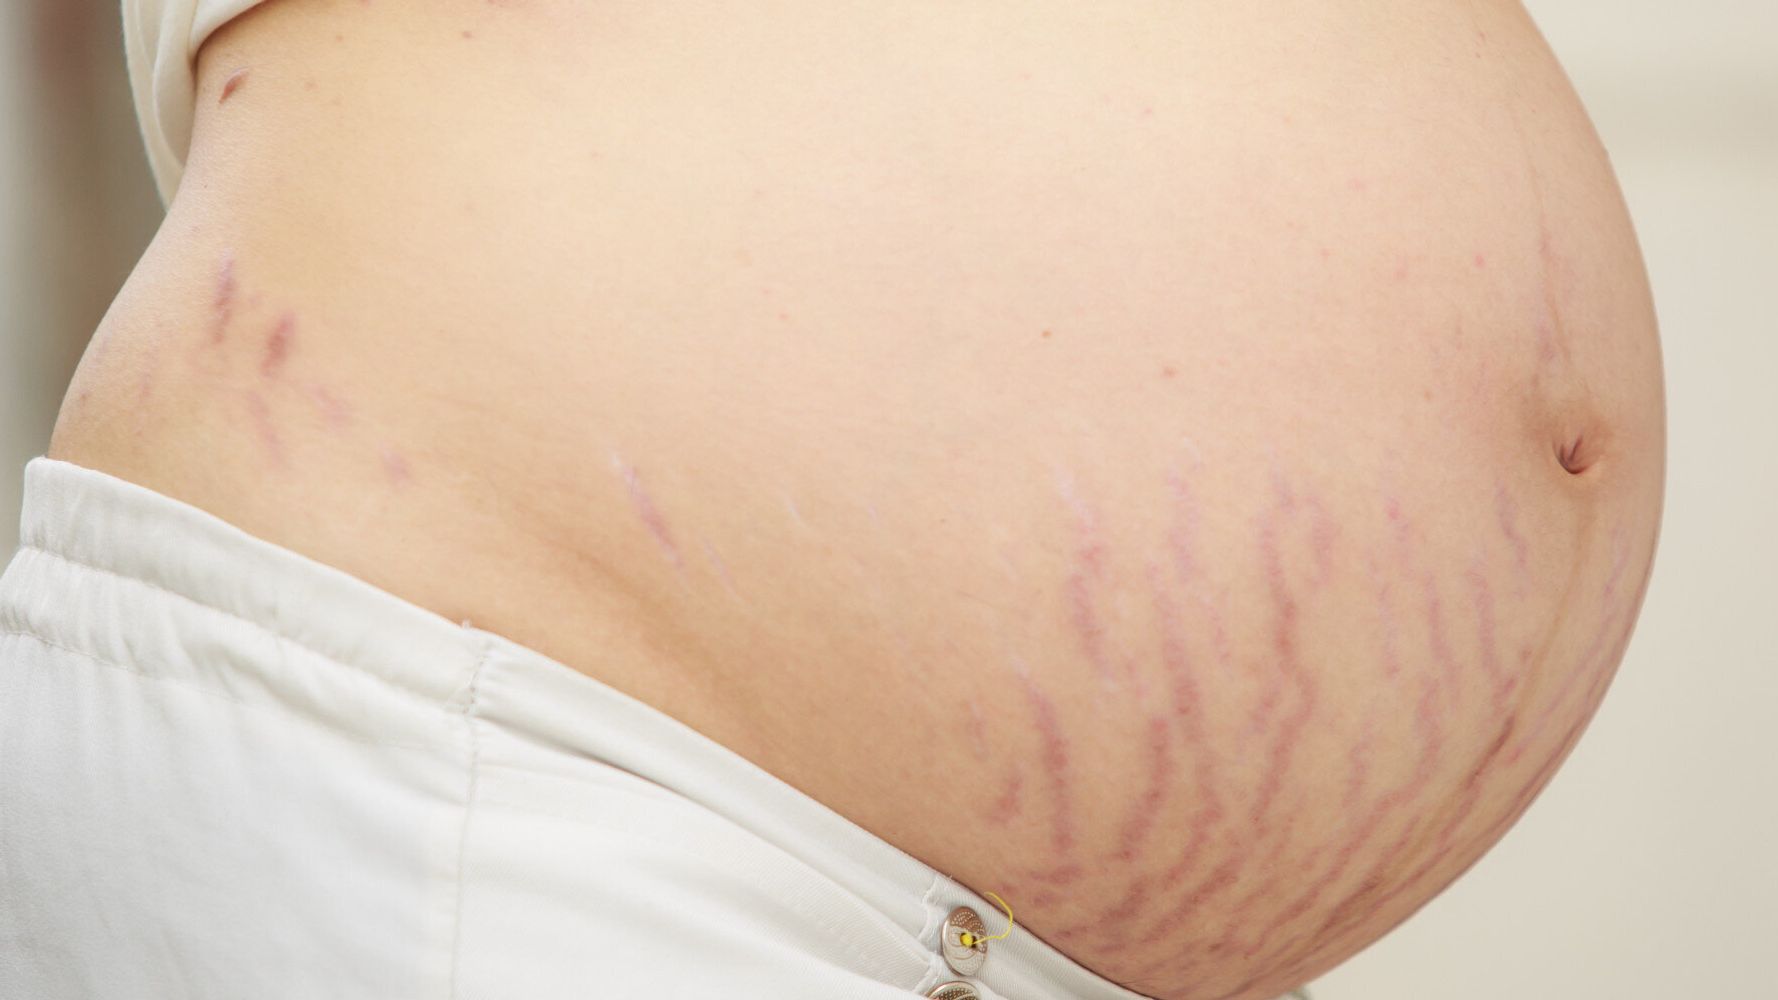 Red bump on stretch mark